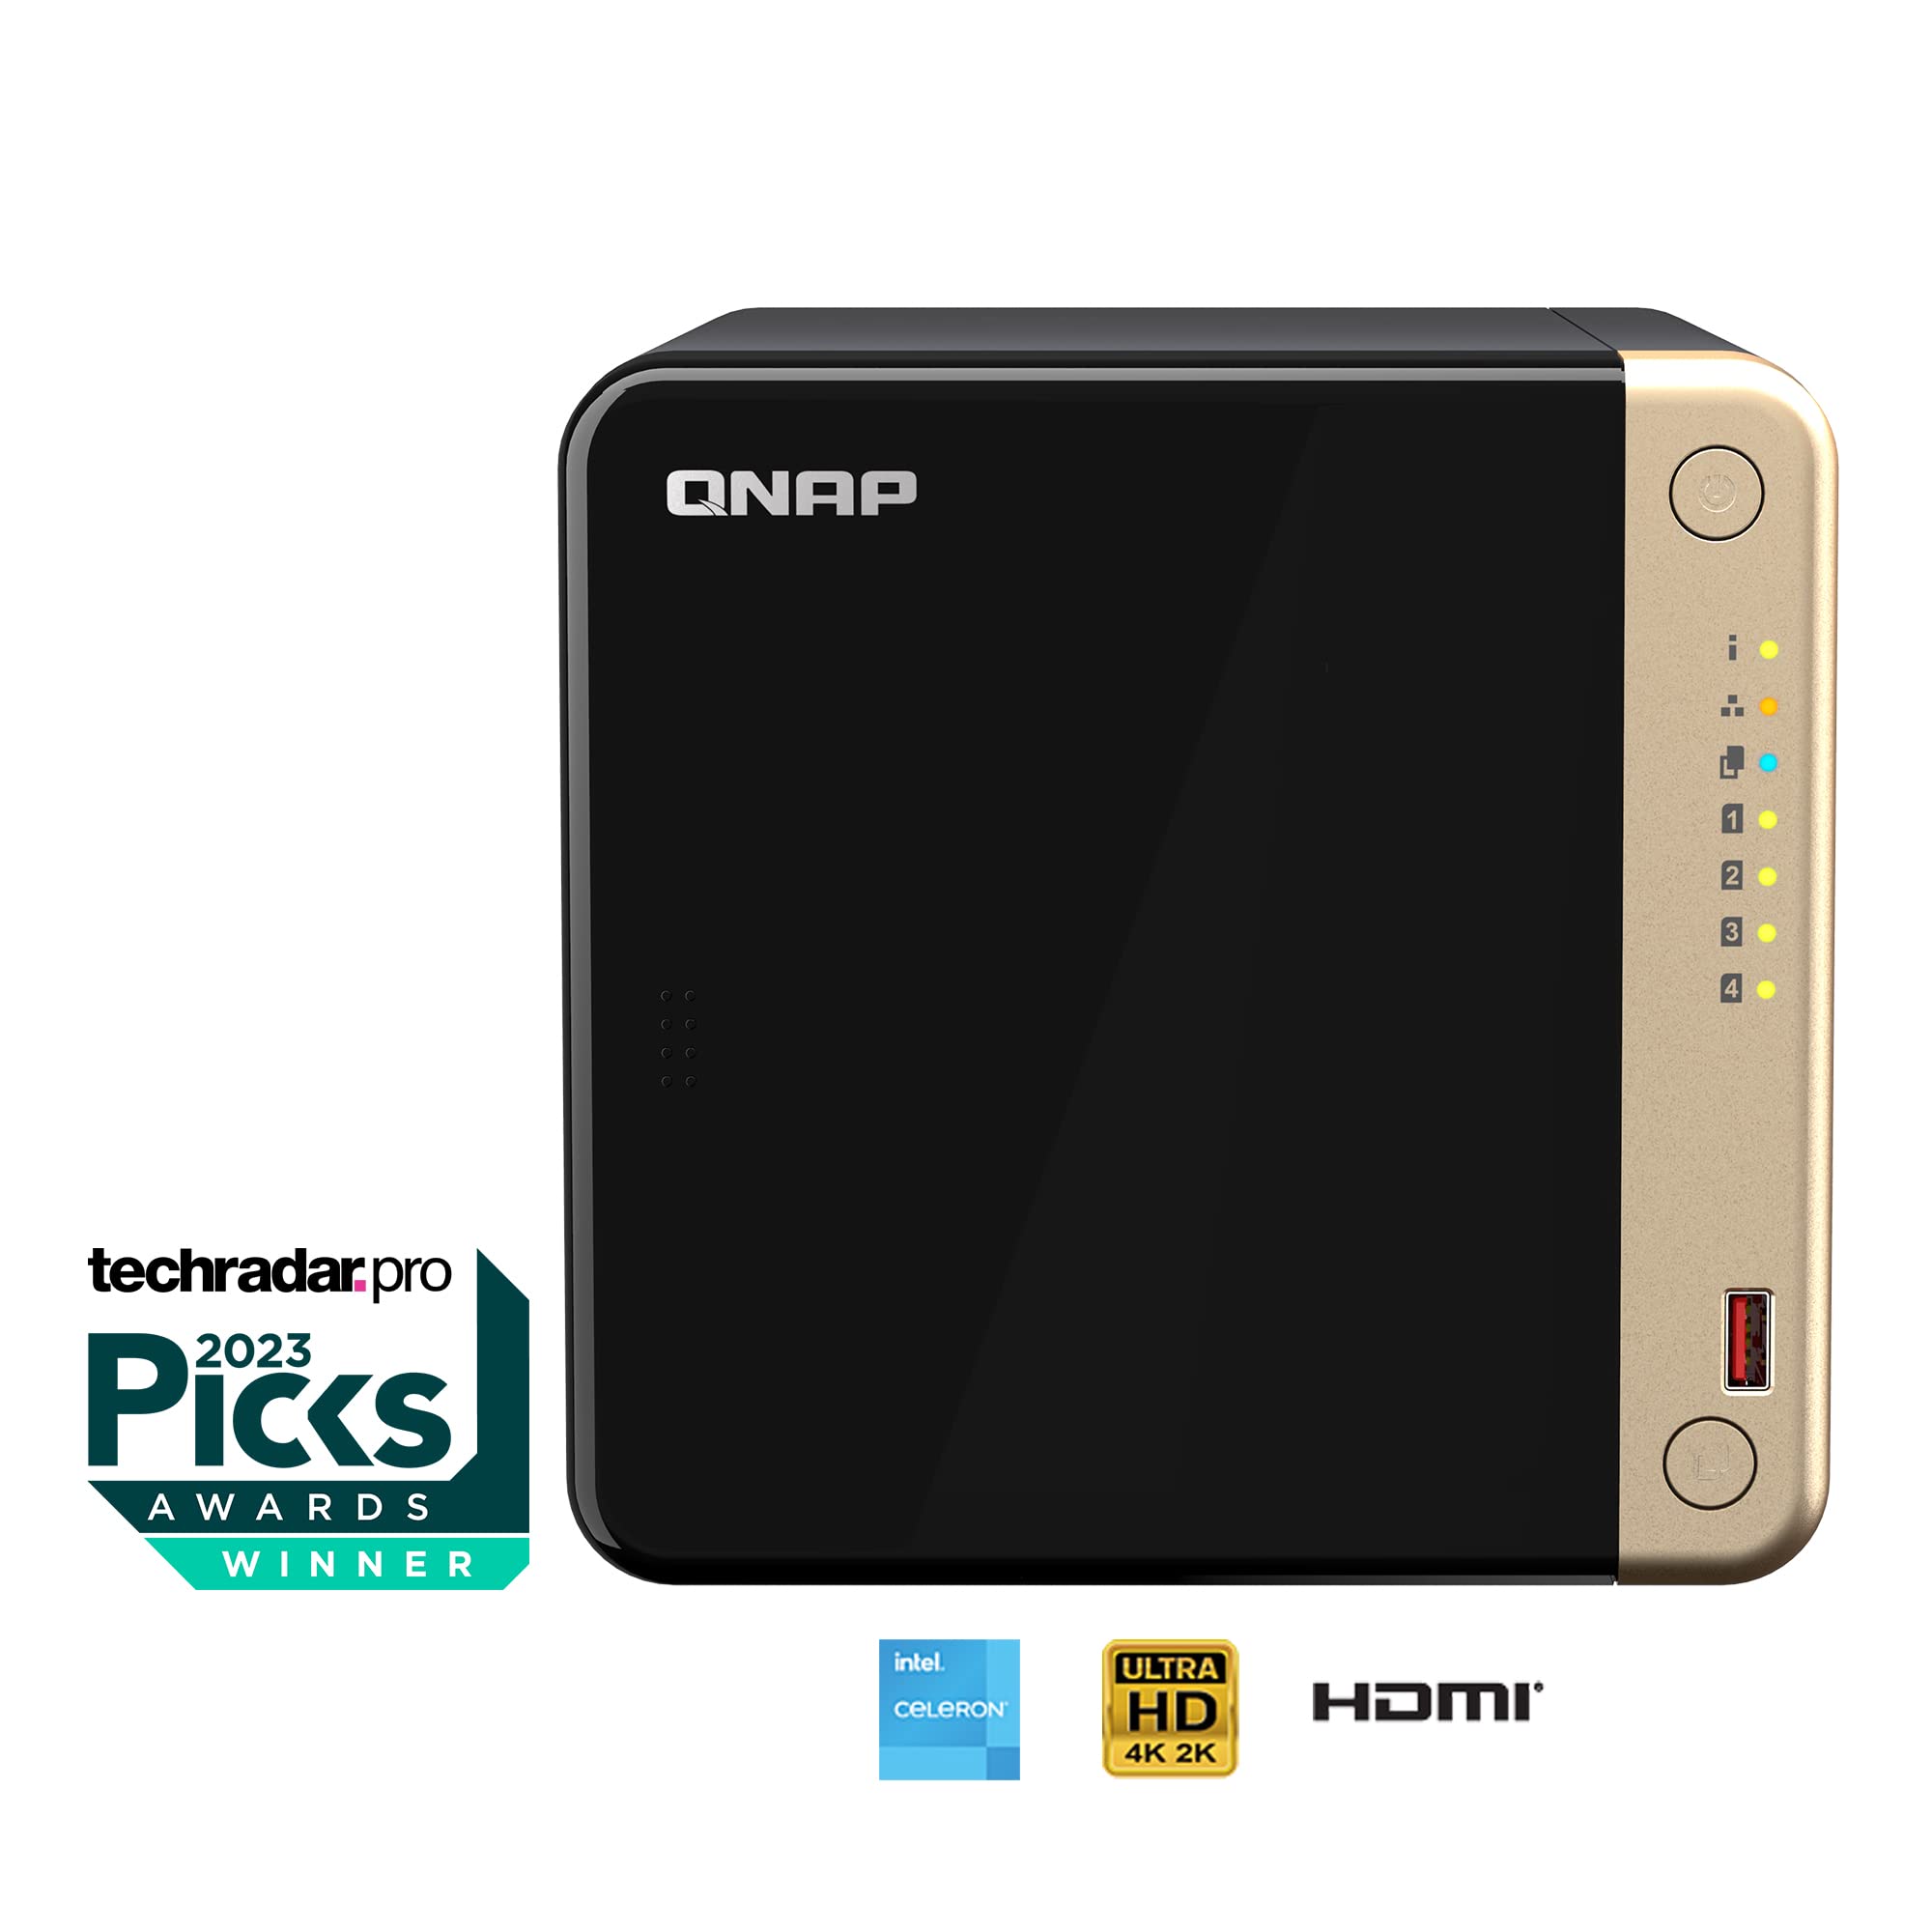 QNAP TS-464-8G-US 4 Bay High-Performance Desktop NAS with Intel Celeron Quad-core Processor, M.2 PCIe Slots and Dual 2.5GbE (2.5G/1G/100M) Network Connectivity (Diskless)